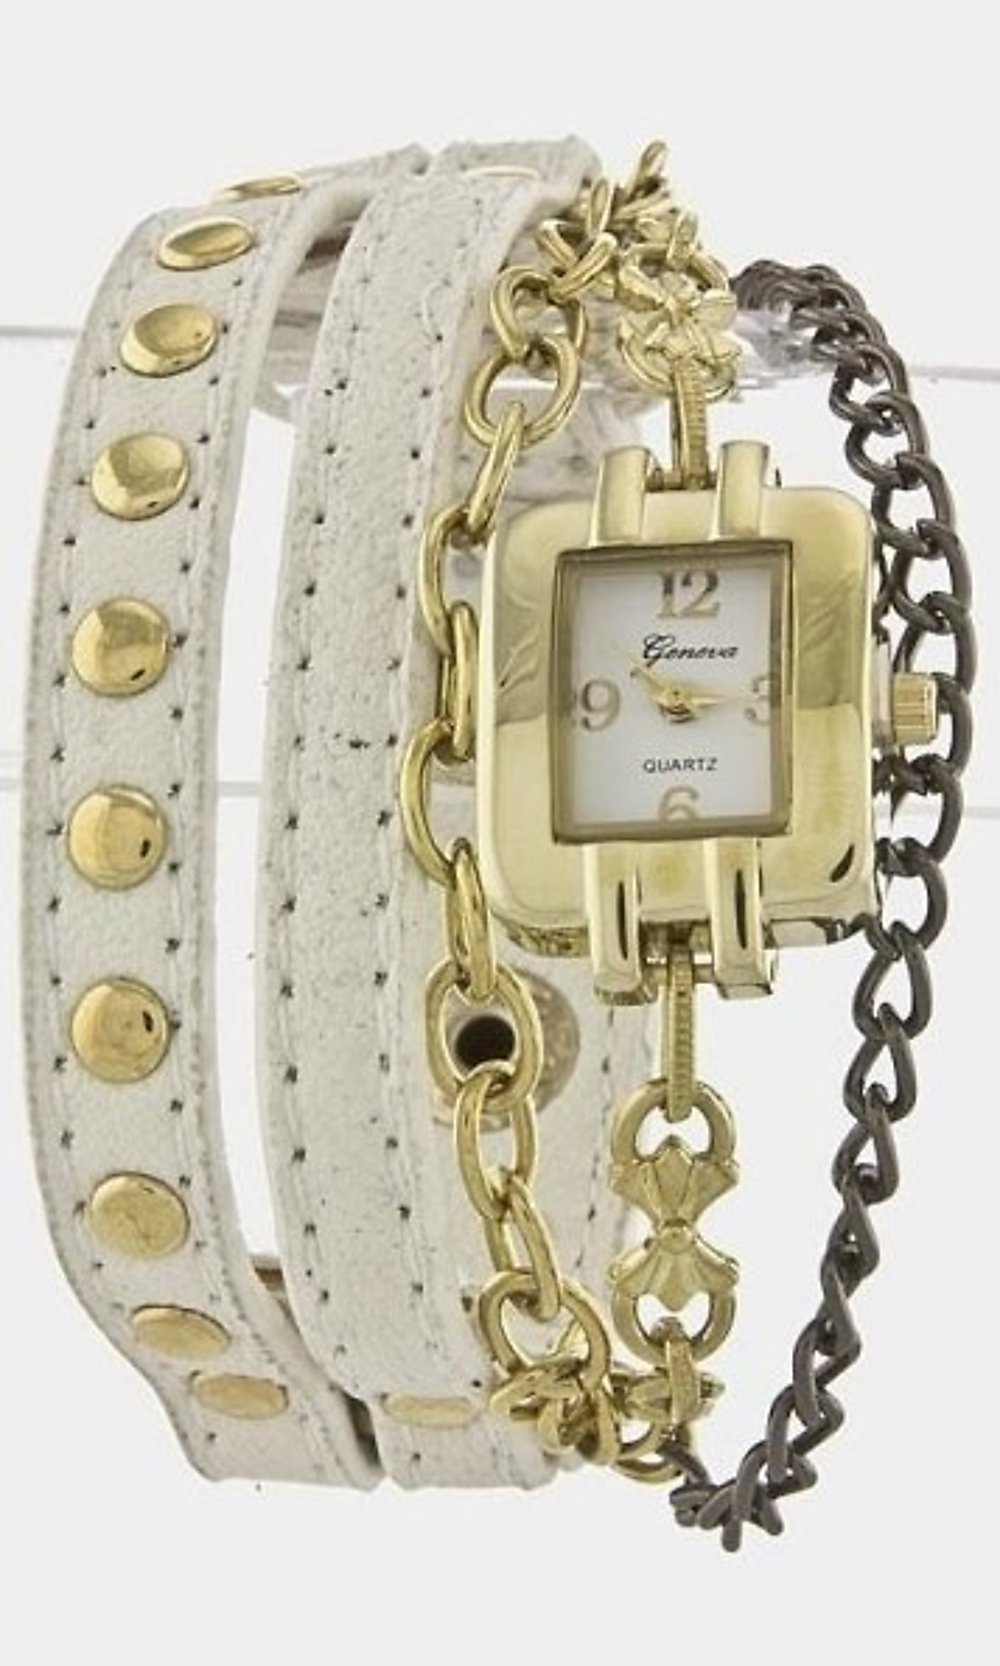 Watch Bracelet with Studded Leather and Chains